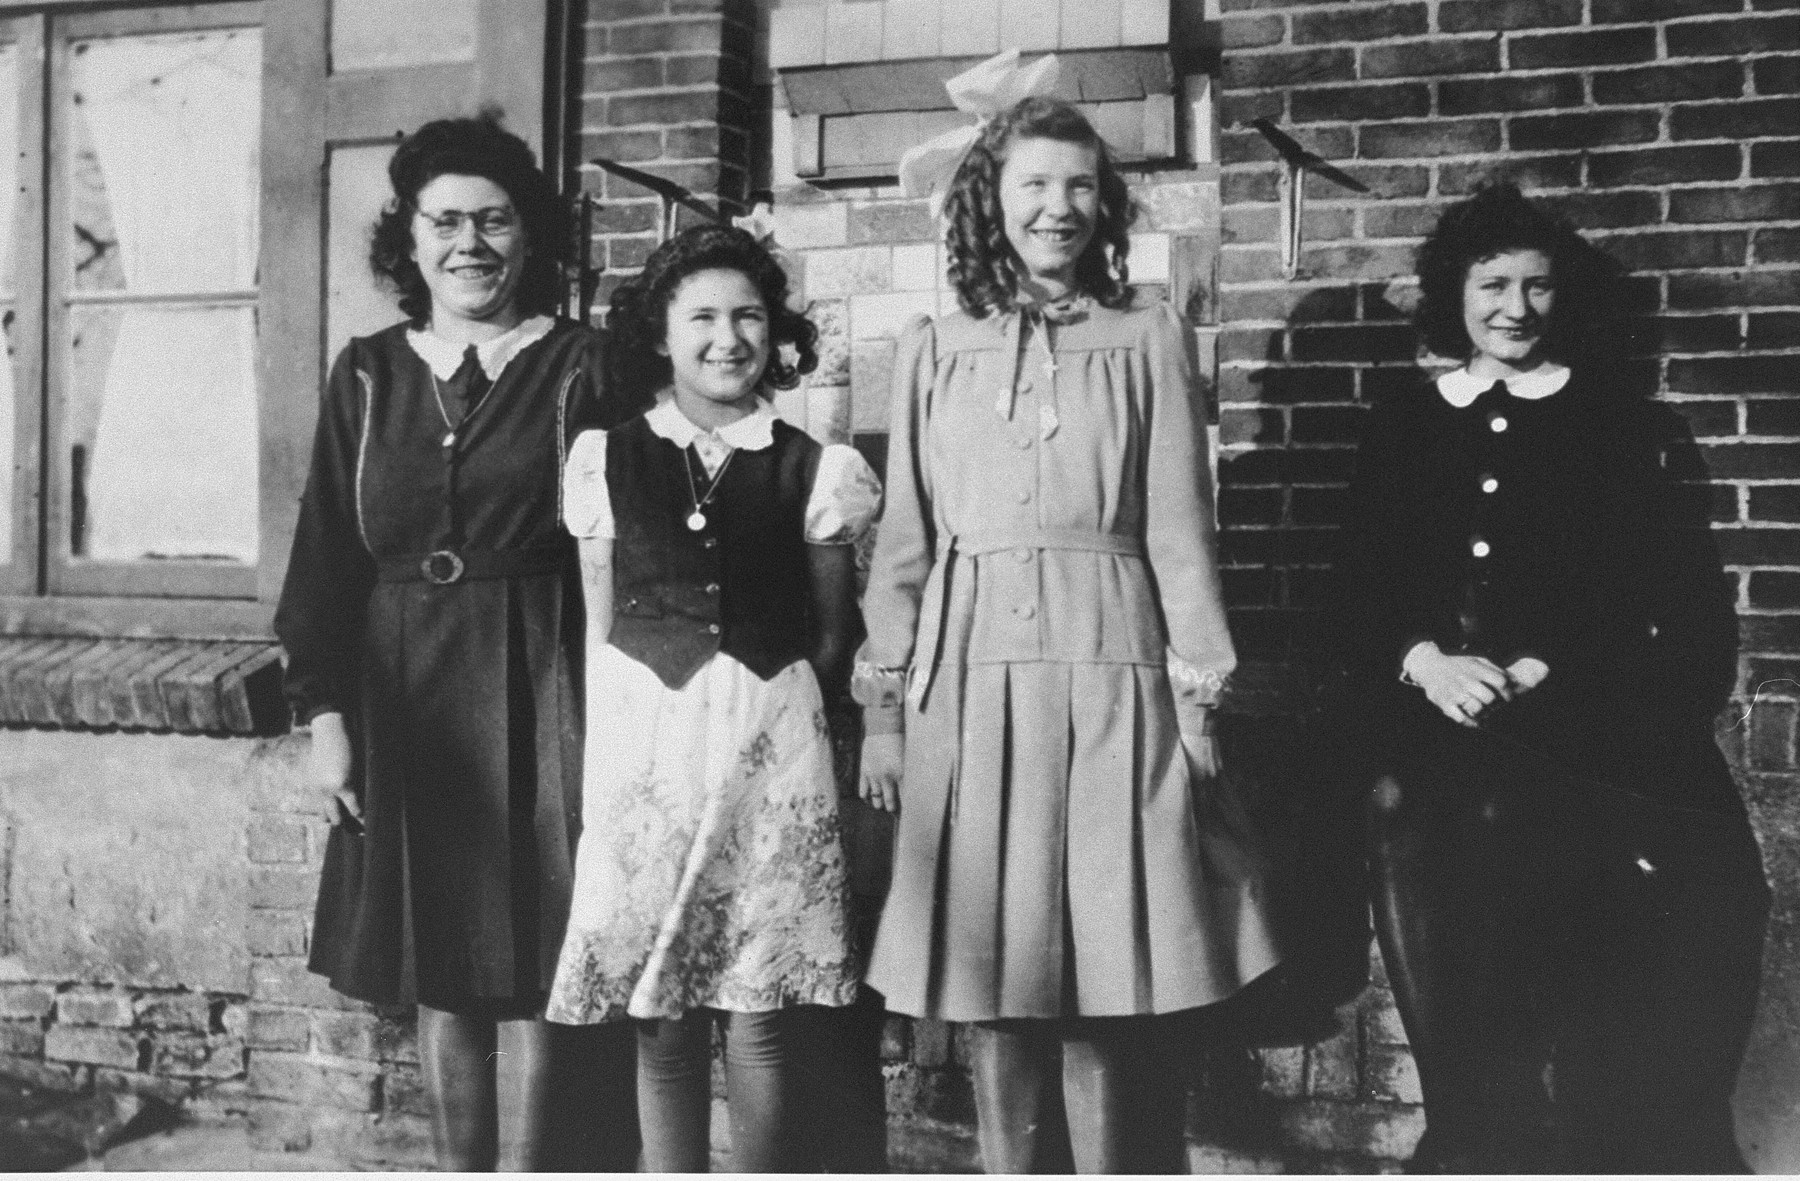 Marion Kaufmann visits the family who hid her during the war. 

She made this last visit before her immigration to the United States. From left to right are: Marie Beelen, Marion Kaufmann (who was hidden under the name Renie Beelen), Rie Beelen, and Grada Beelen.